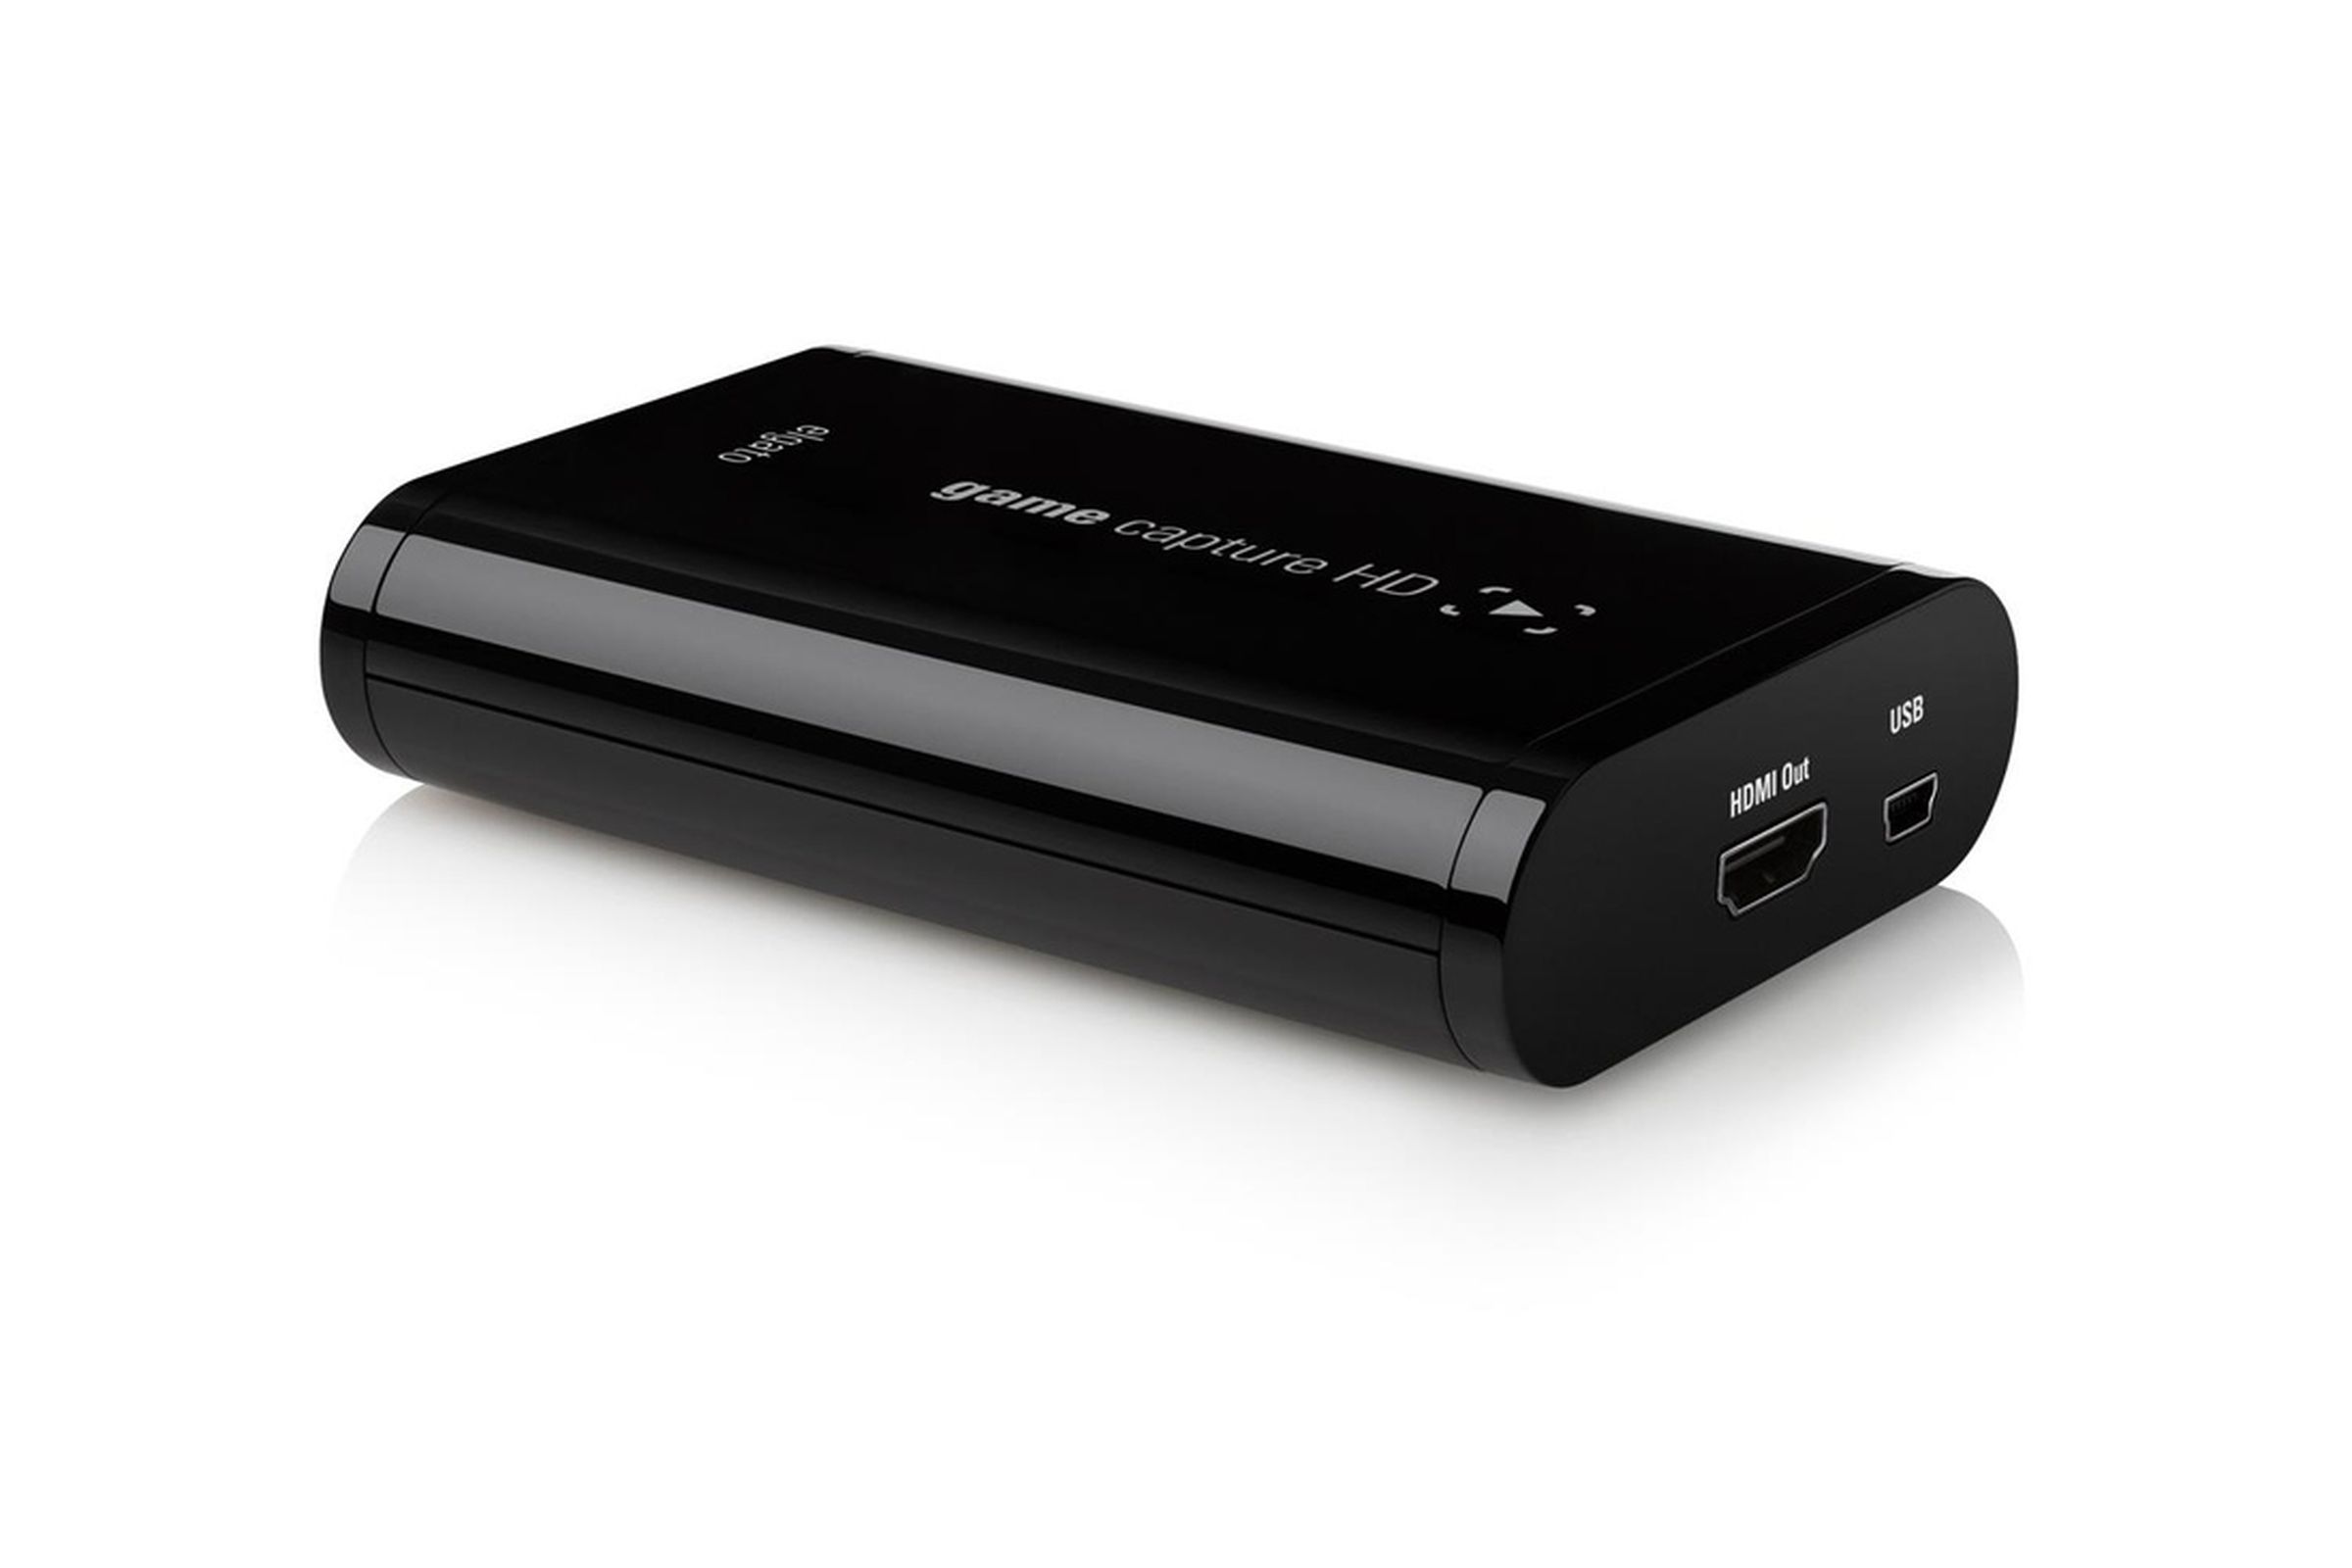 Gallery Photo: Elgato Game Center HD press pictures